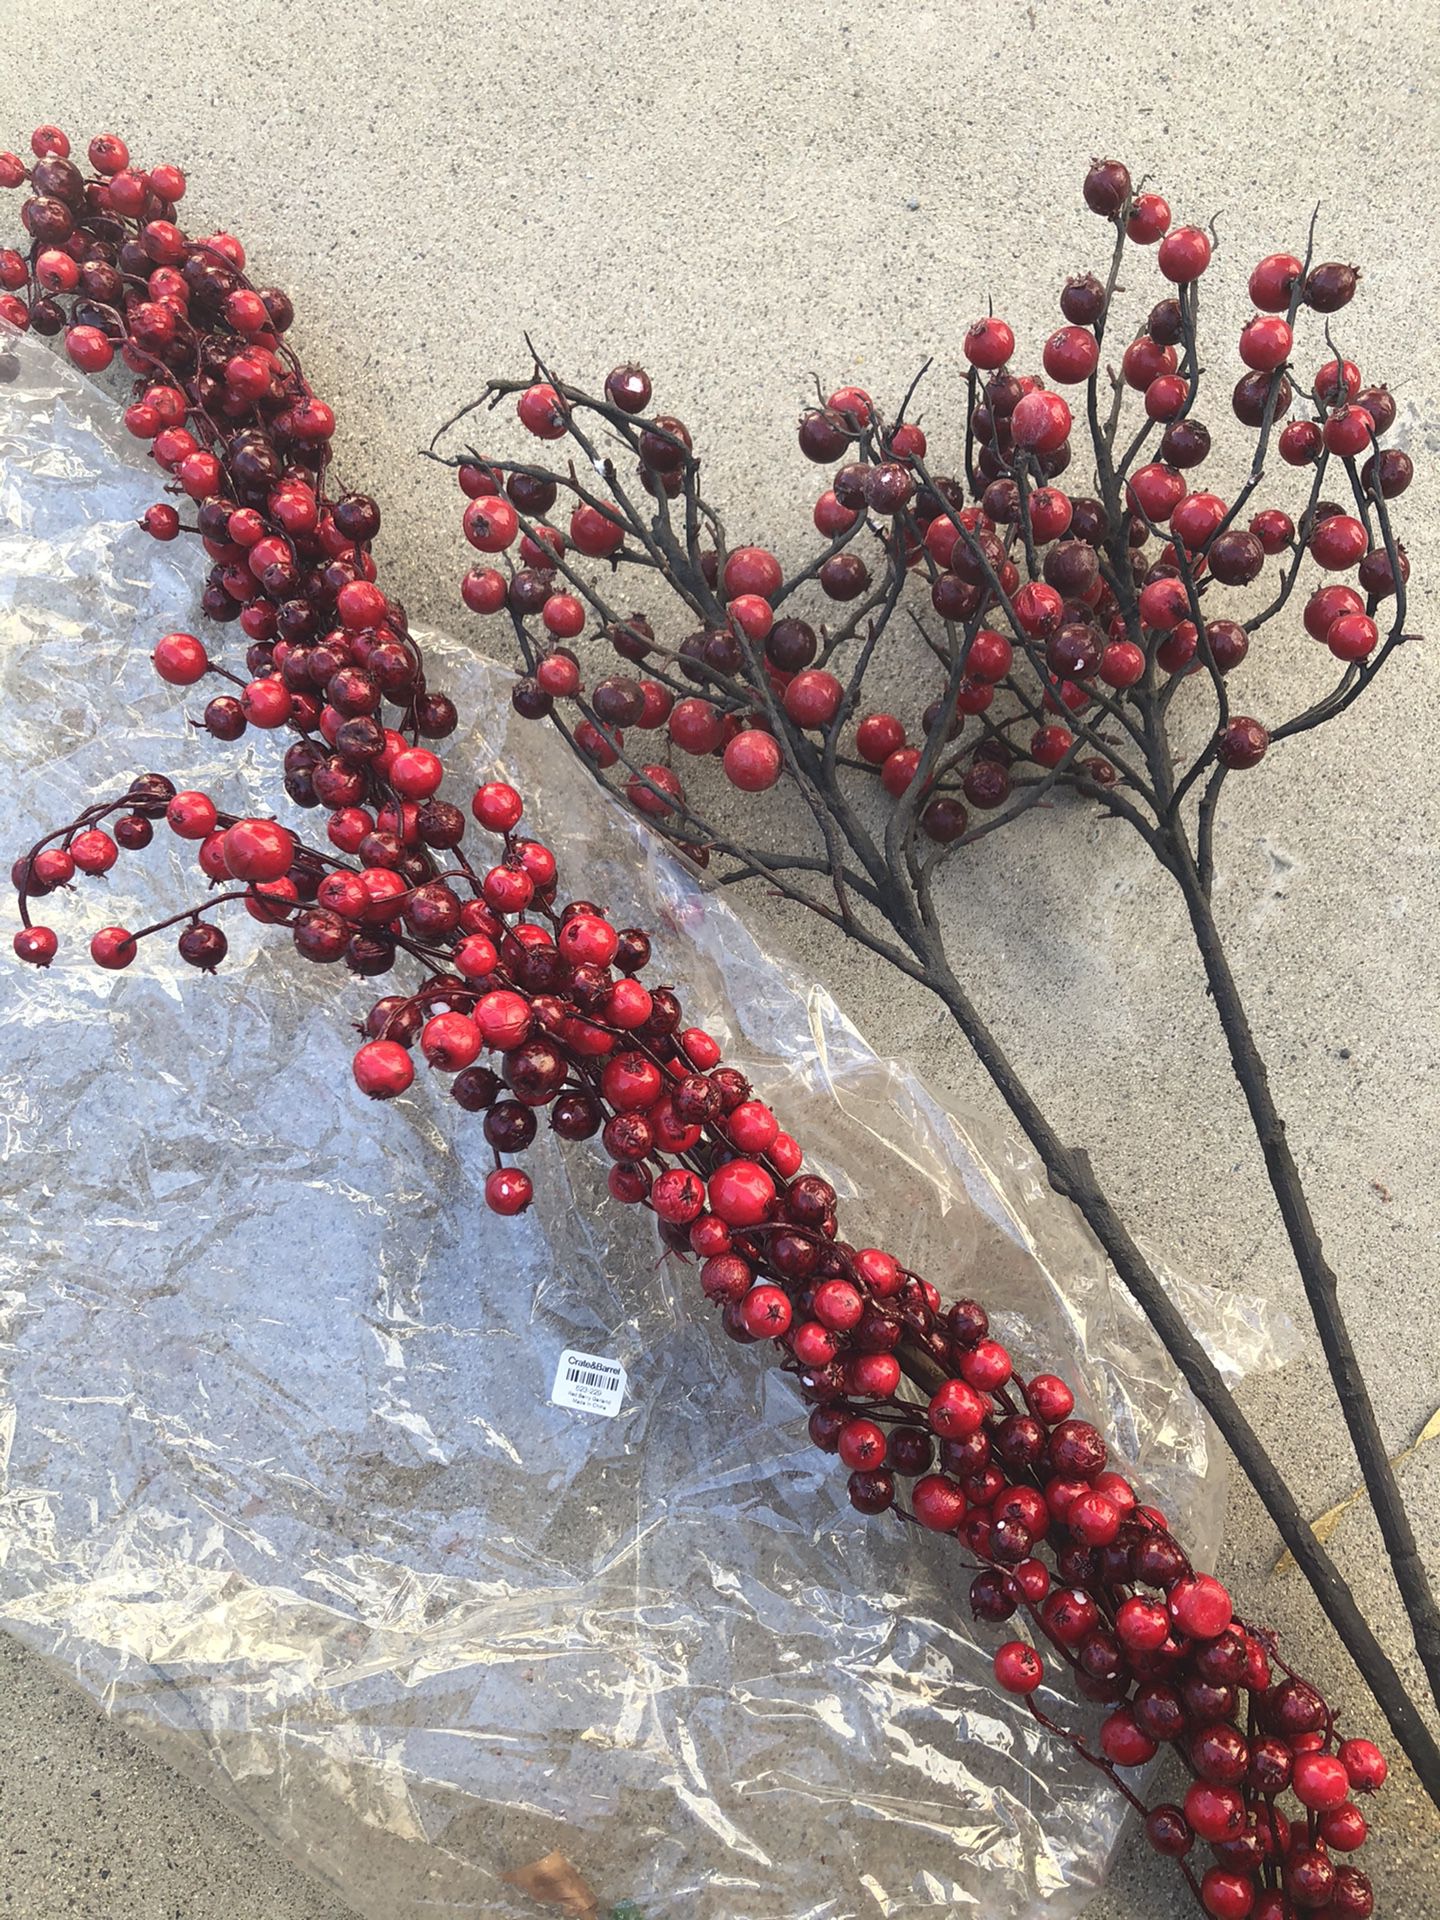 Crate and barrel red berry garland and vase stems